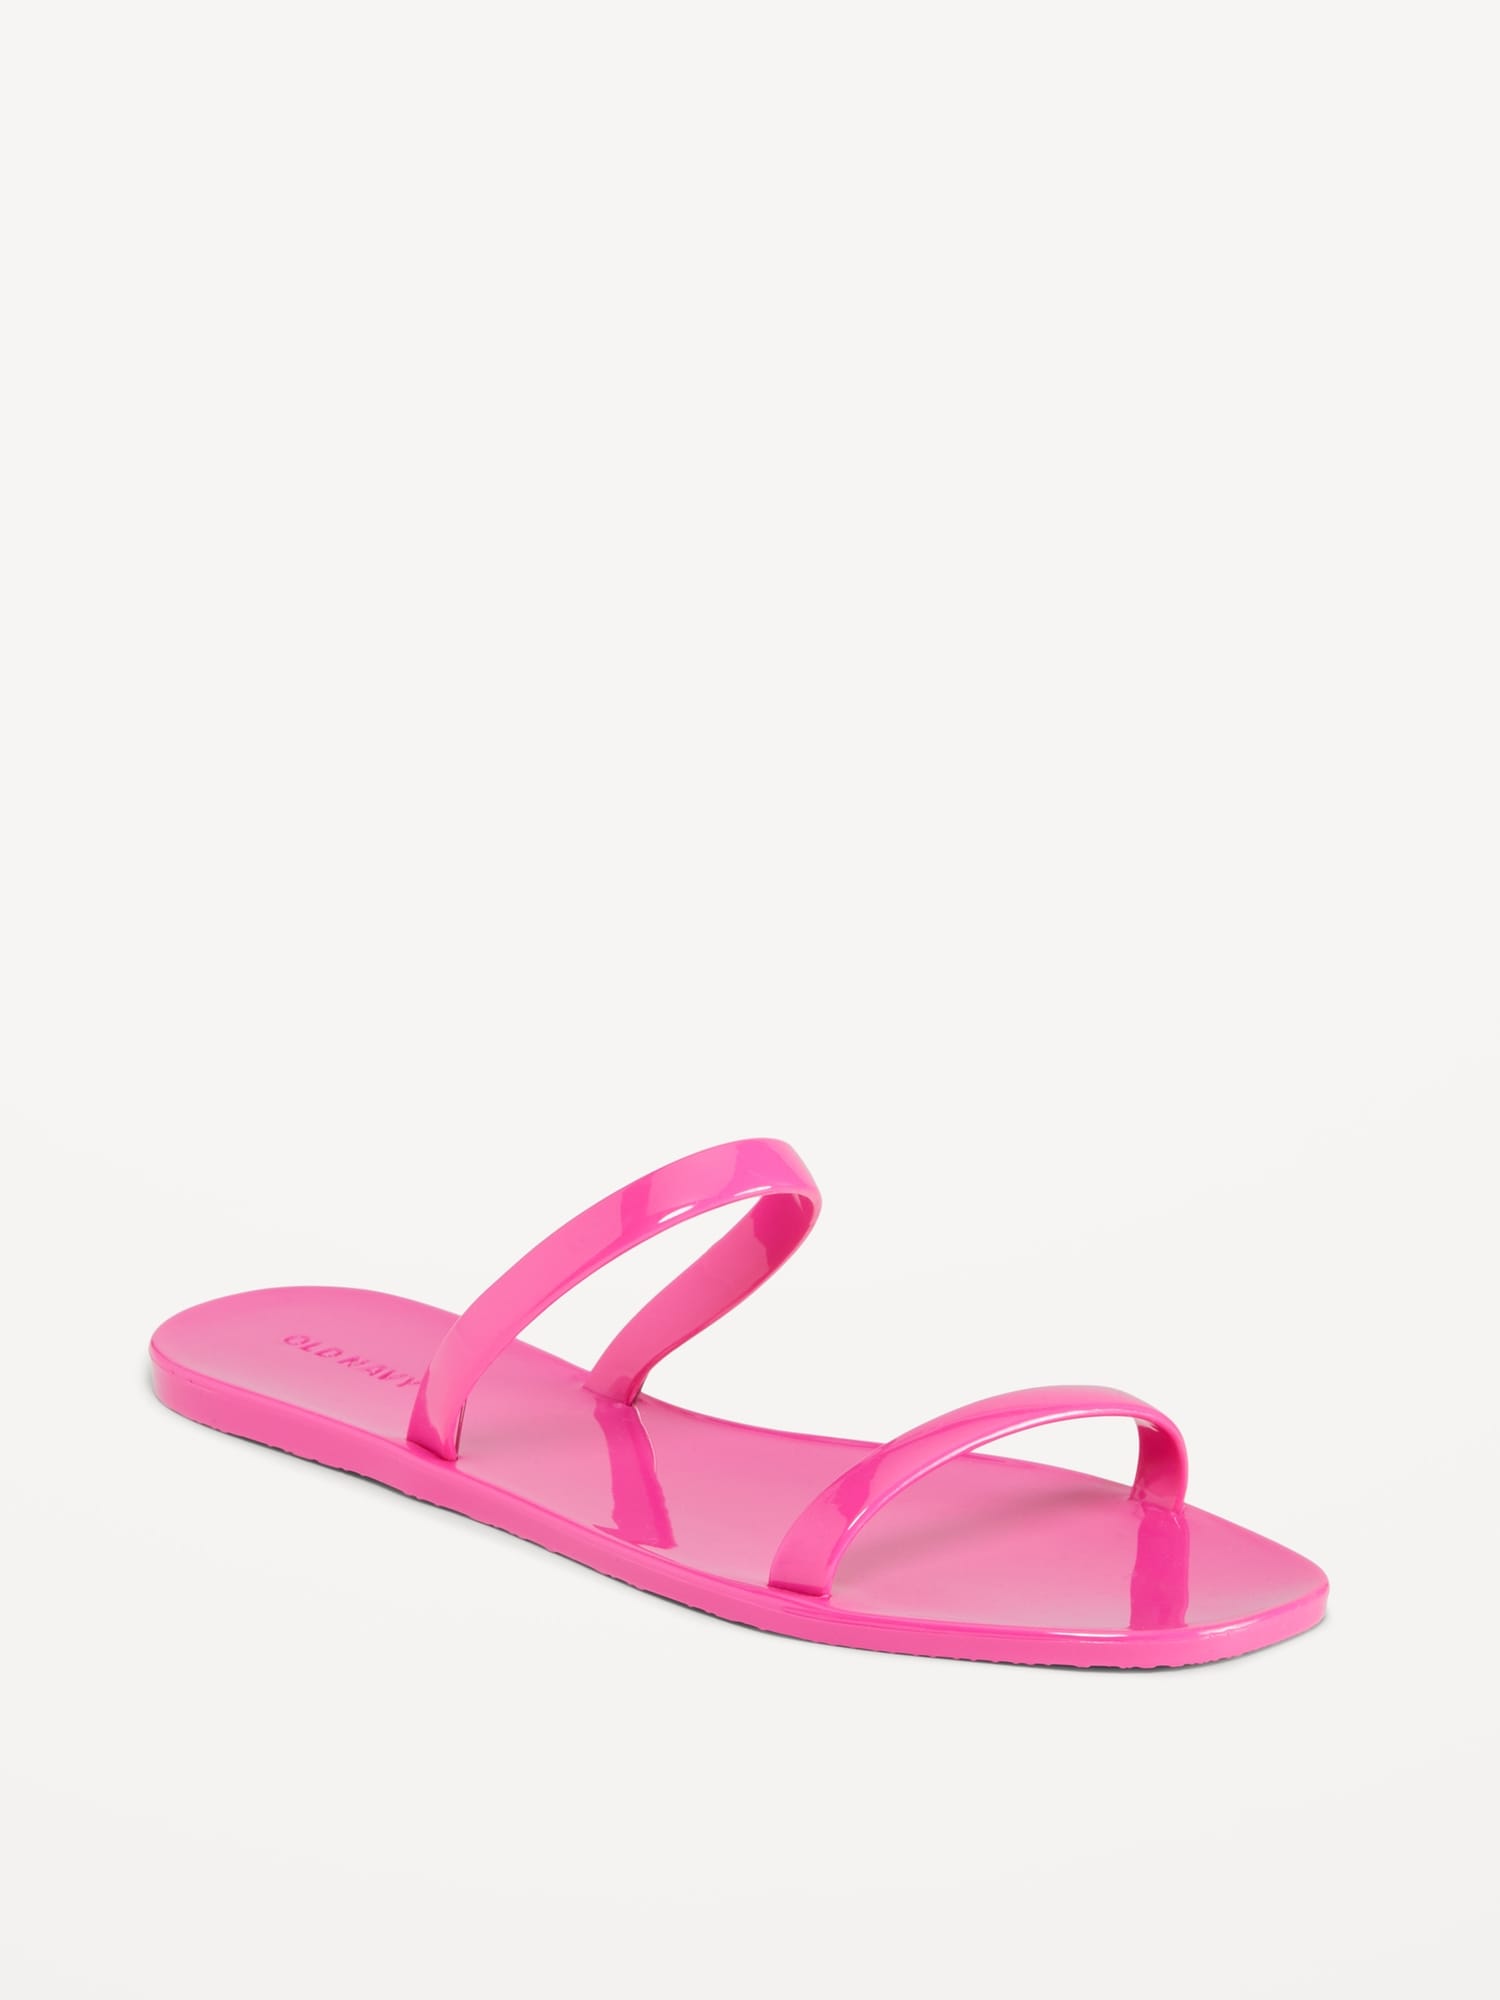 Old Navy Shiny-Jelly Slide Sandals for Women pink - 650610082